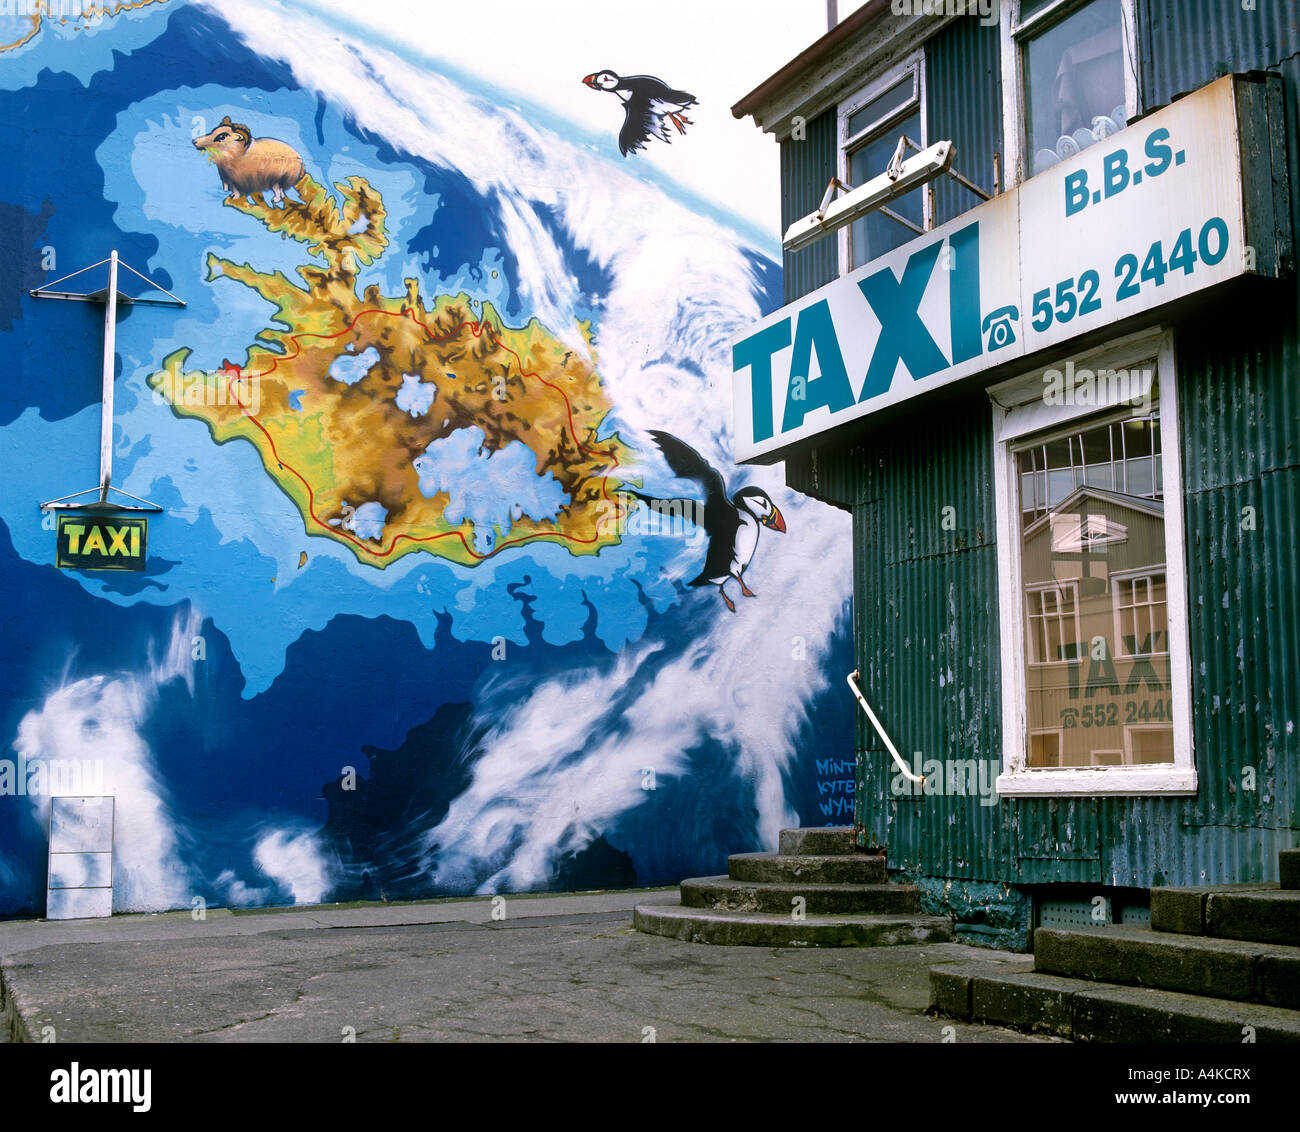 A painted map of Iceland (with puffins) on a wall next to a taxi office, Reykjavik, Iceland. Stock Photo